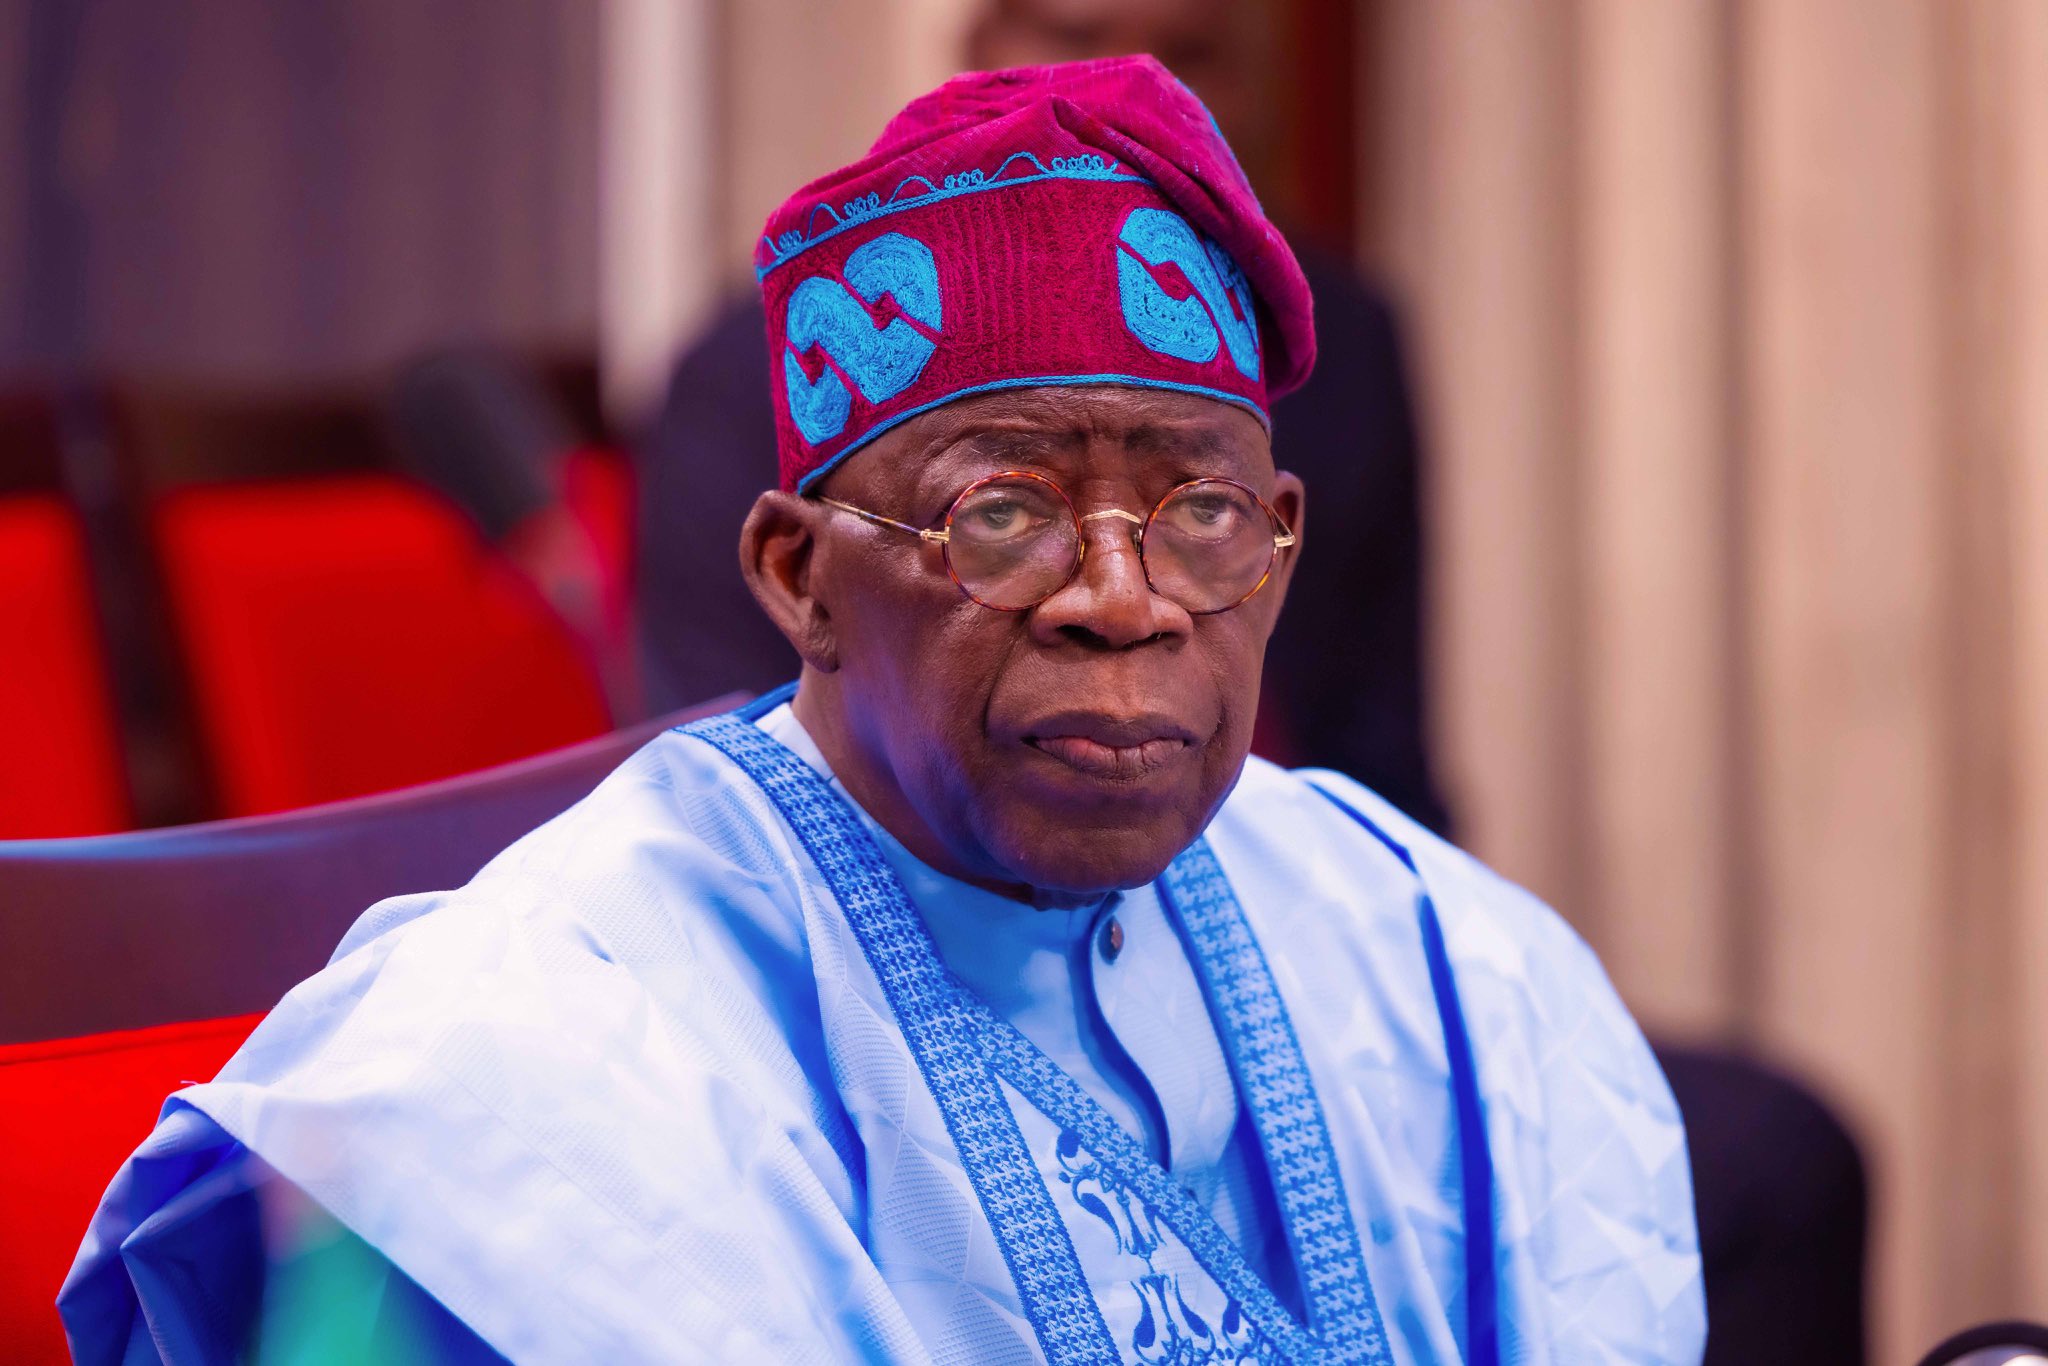 Your policies caused hardship, worsening insecurity in Nigeria – PDP slams Tinubu